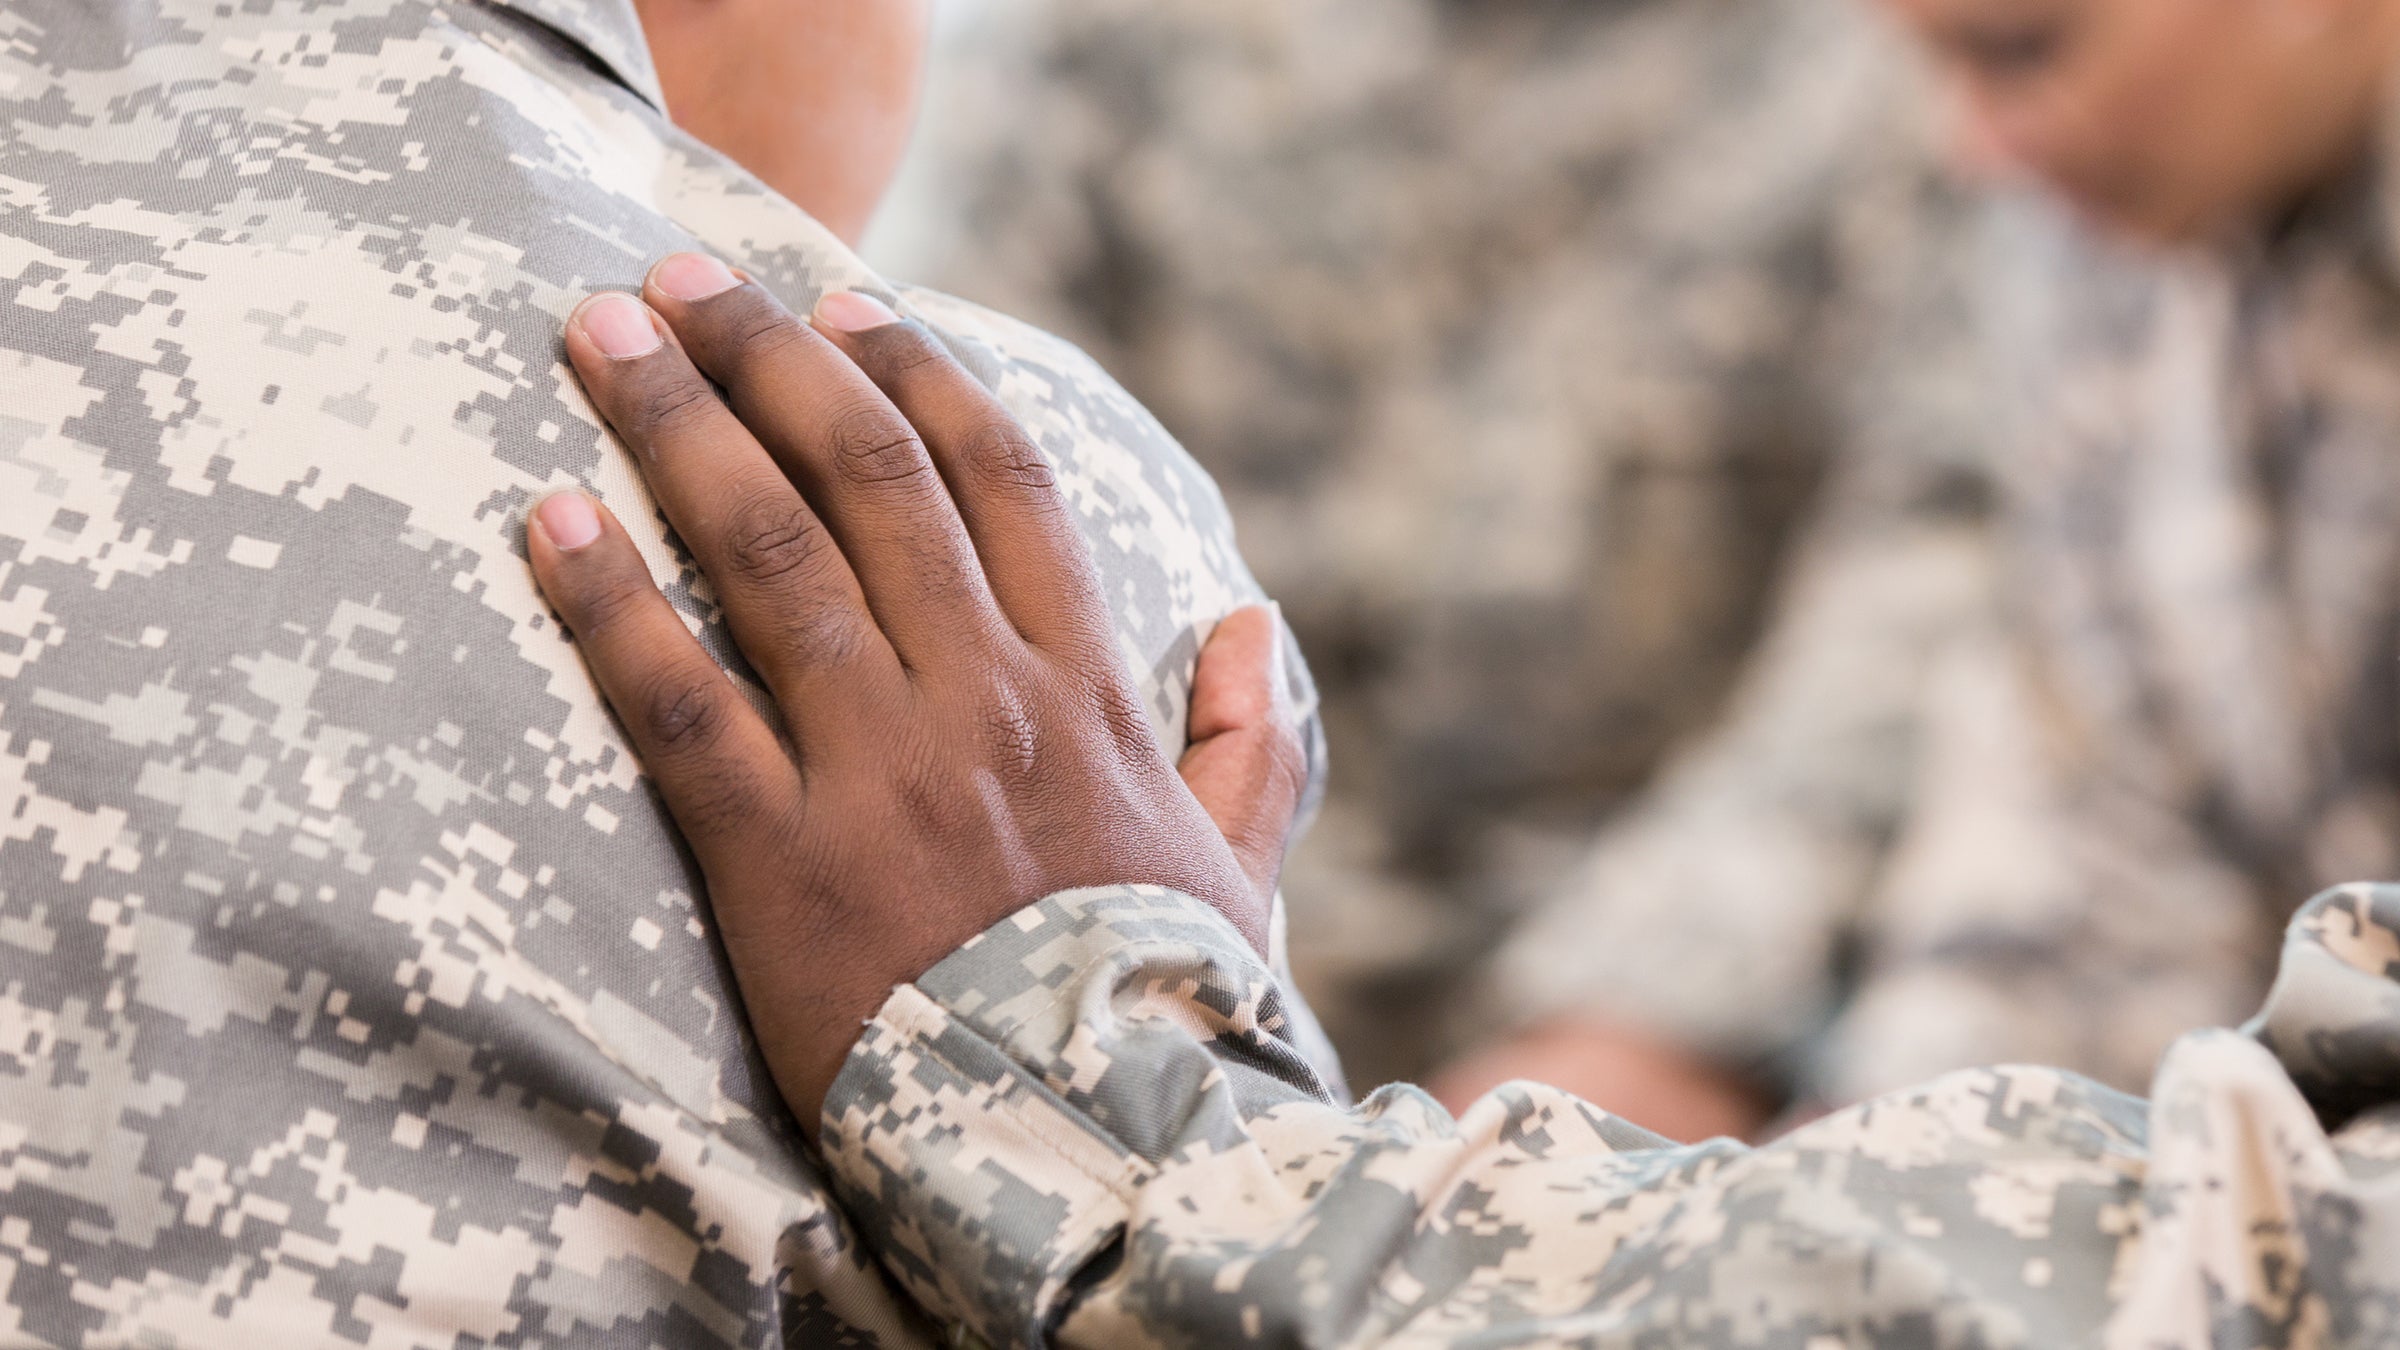 Soldiers pray during therapy session